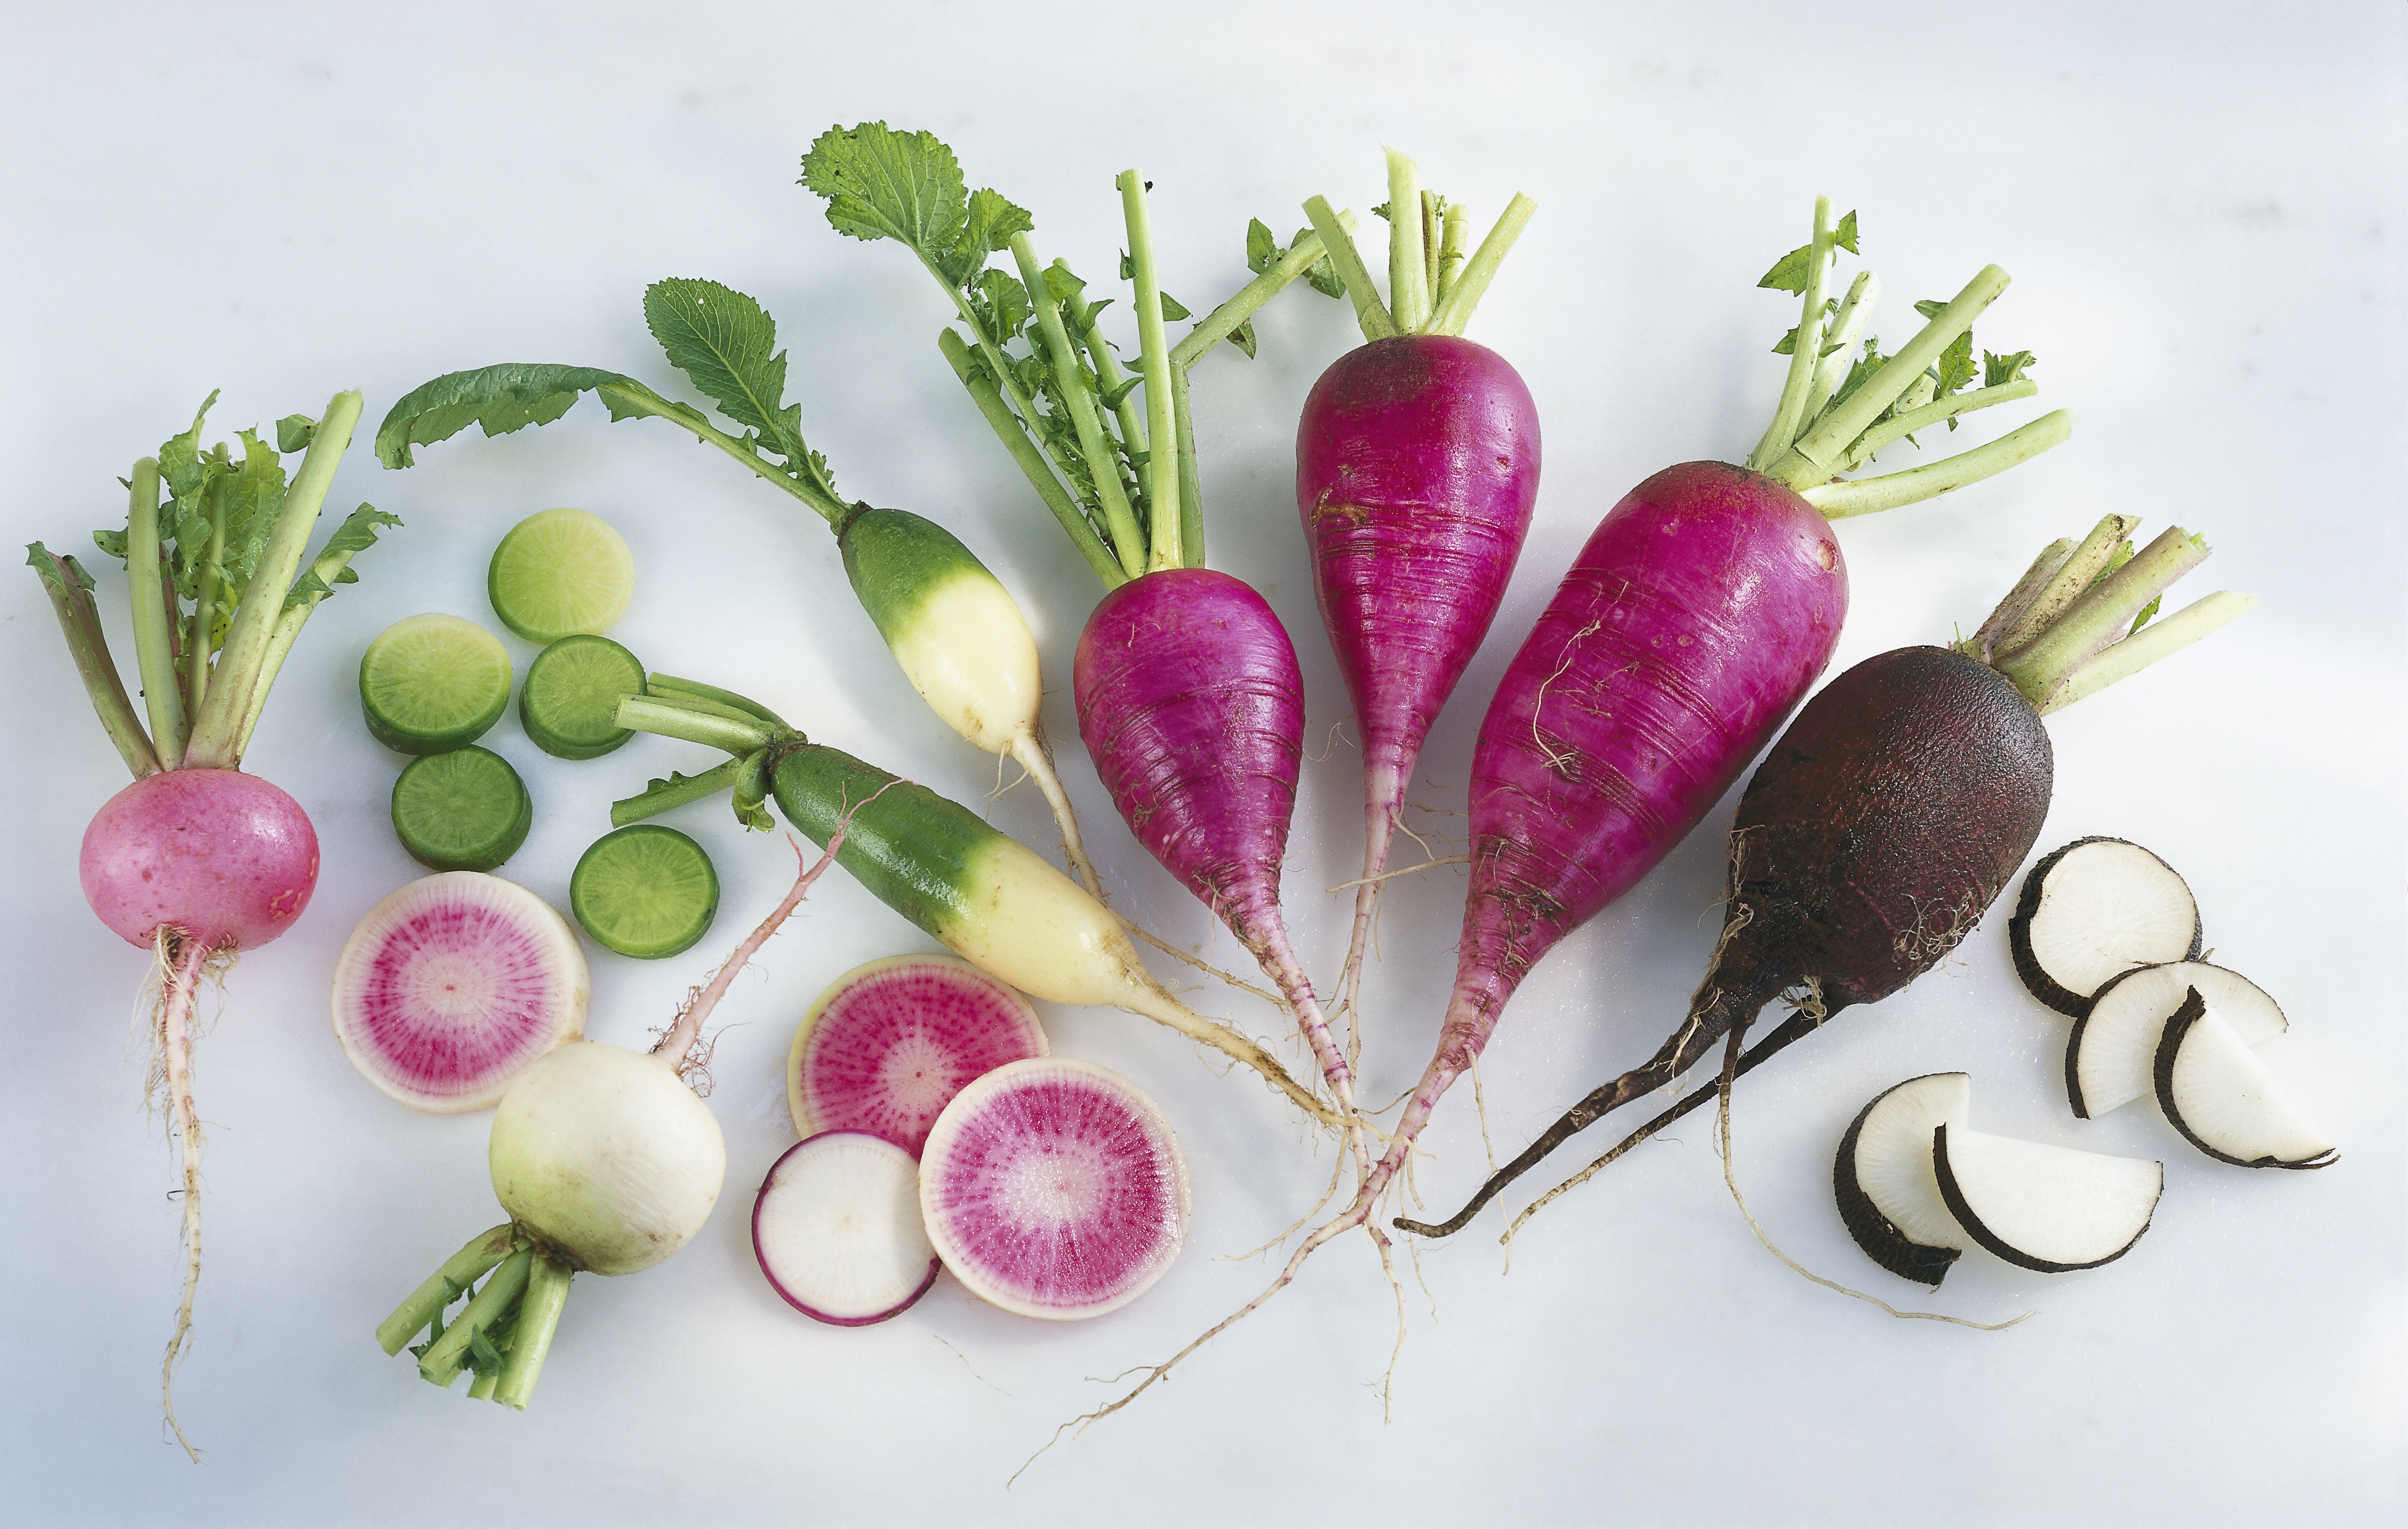 Types of Radishes, From Tiny to Giant